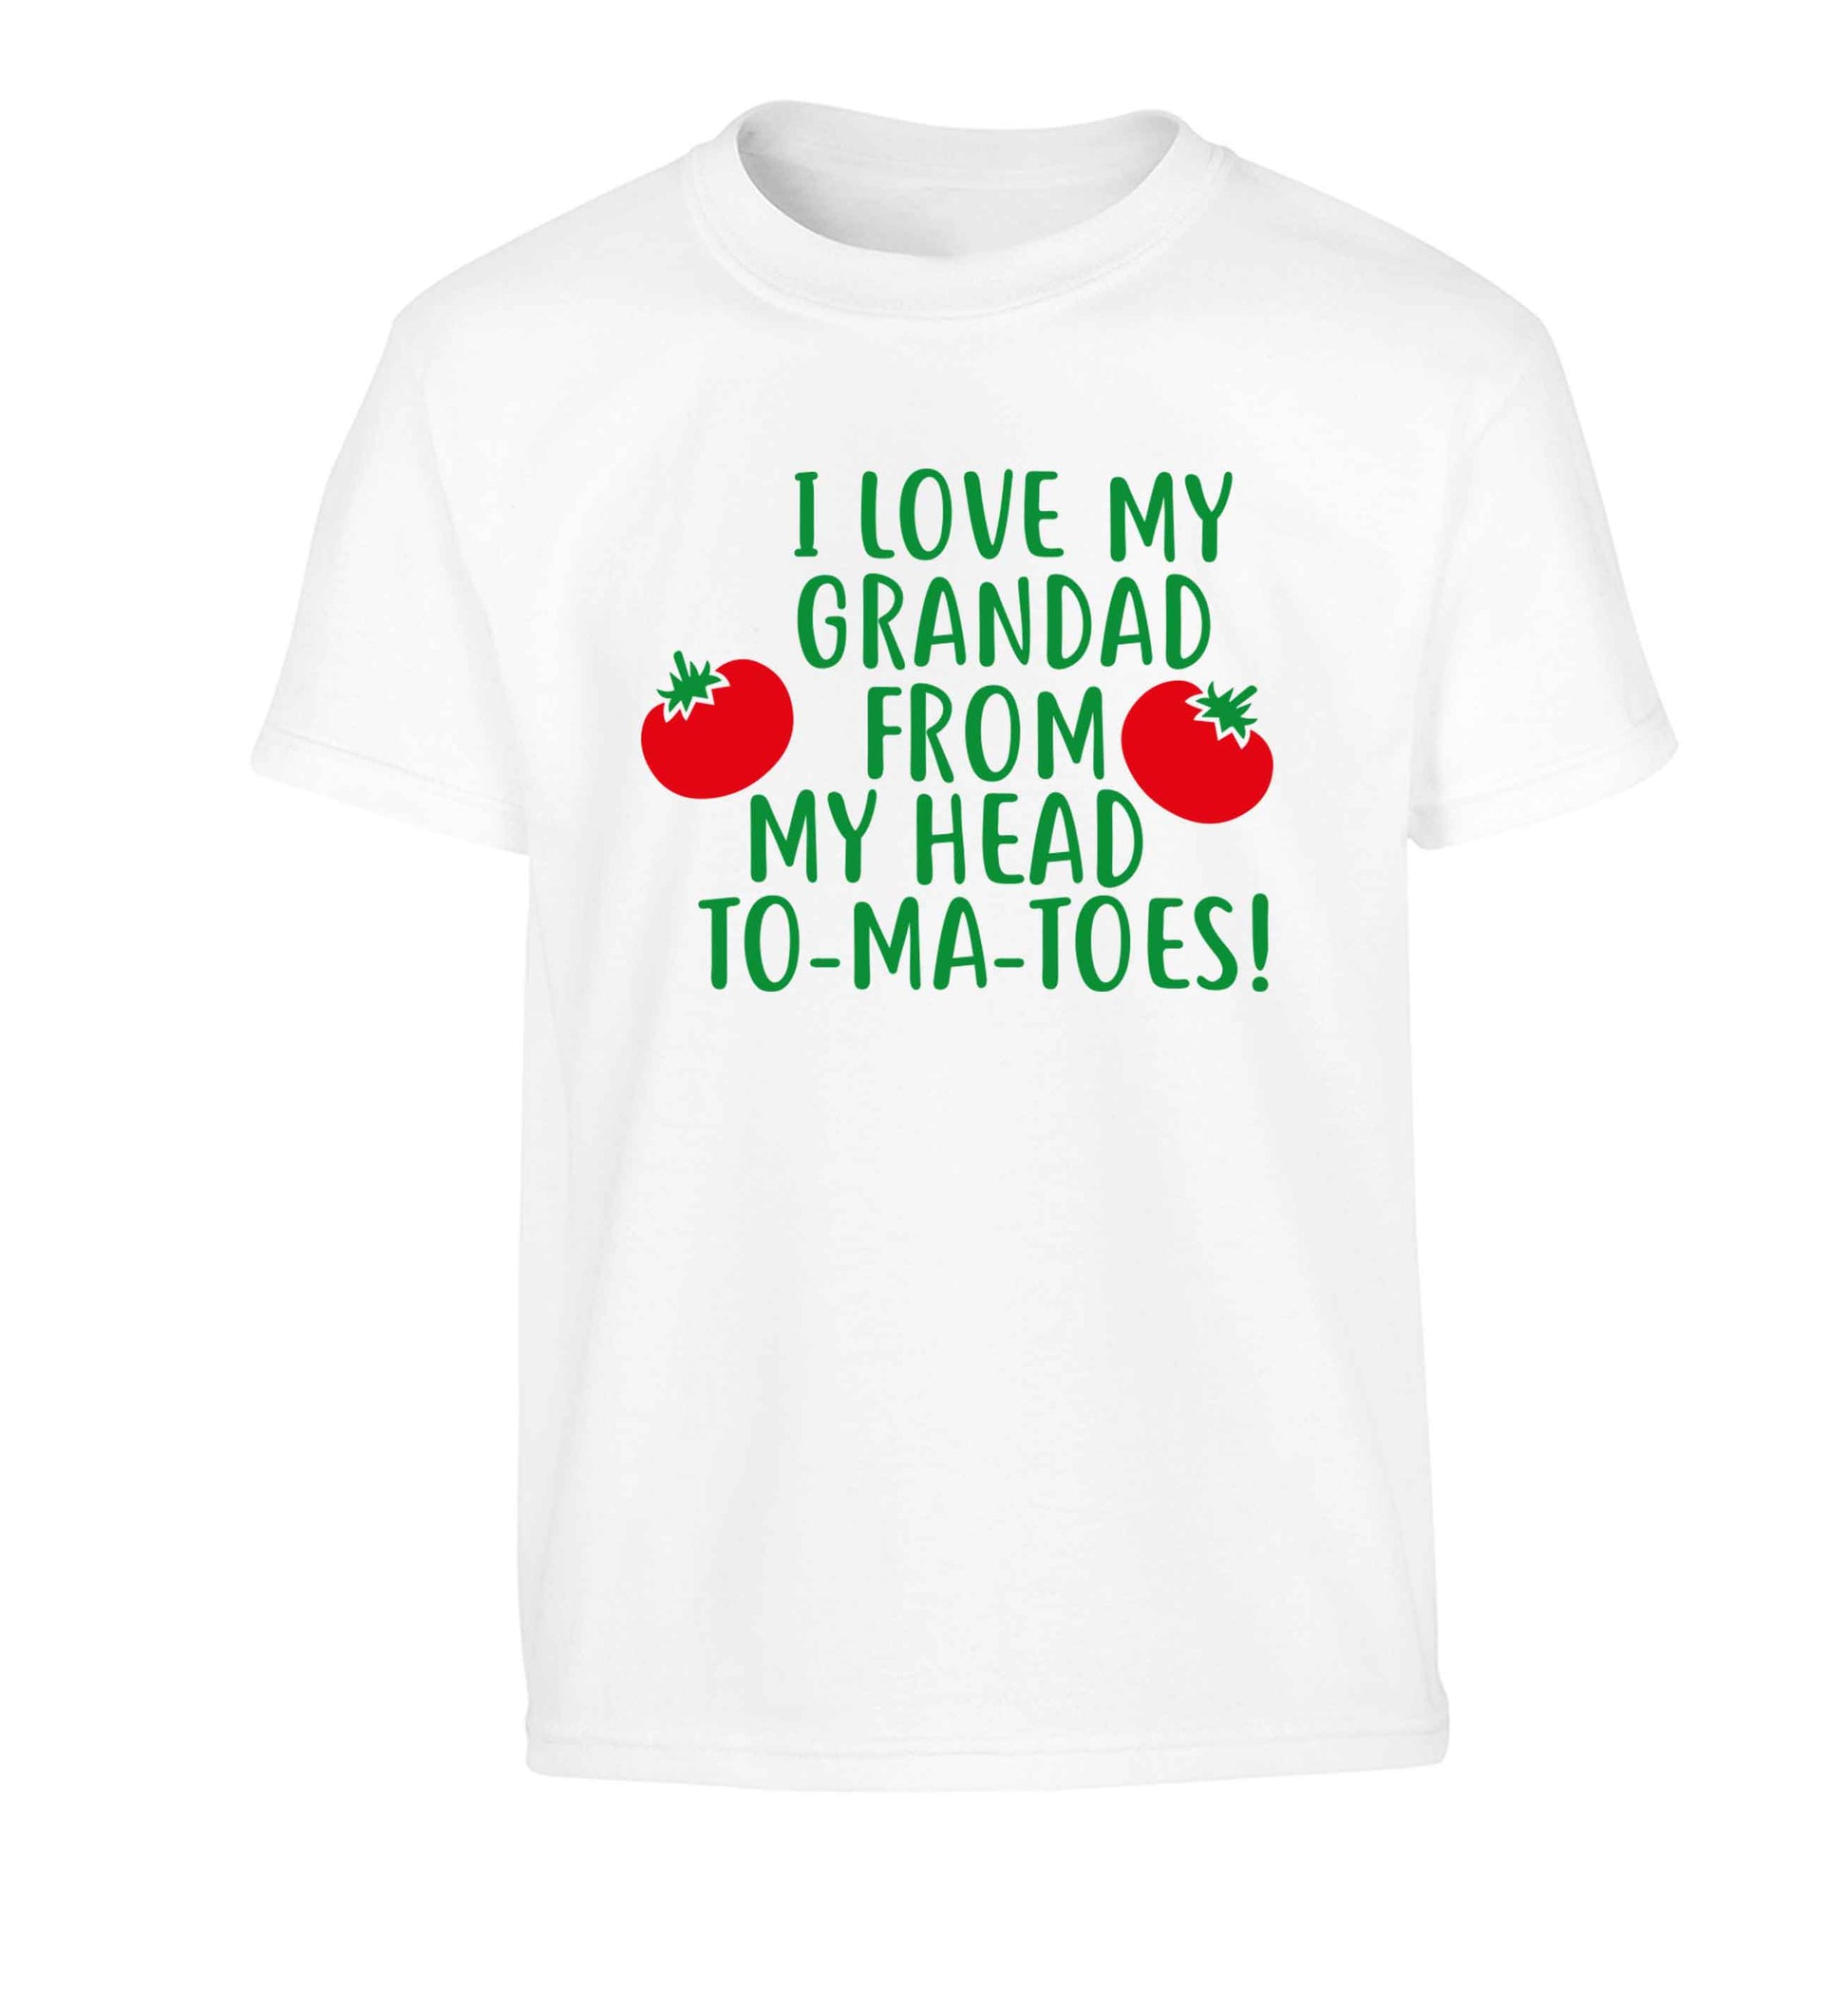 I love my grandad from my head To-Ma-Toes Children's white Tshirt 12-13 Years